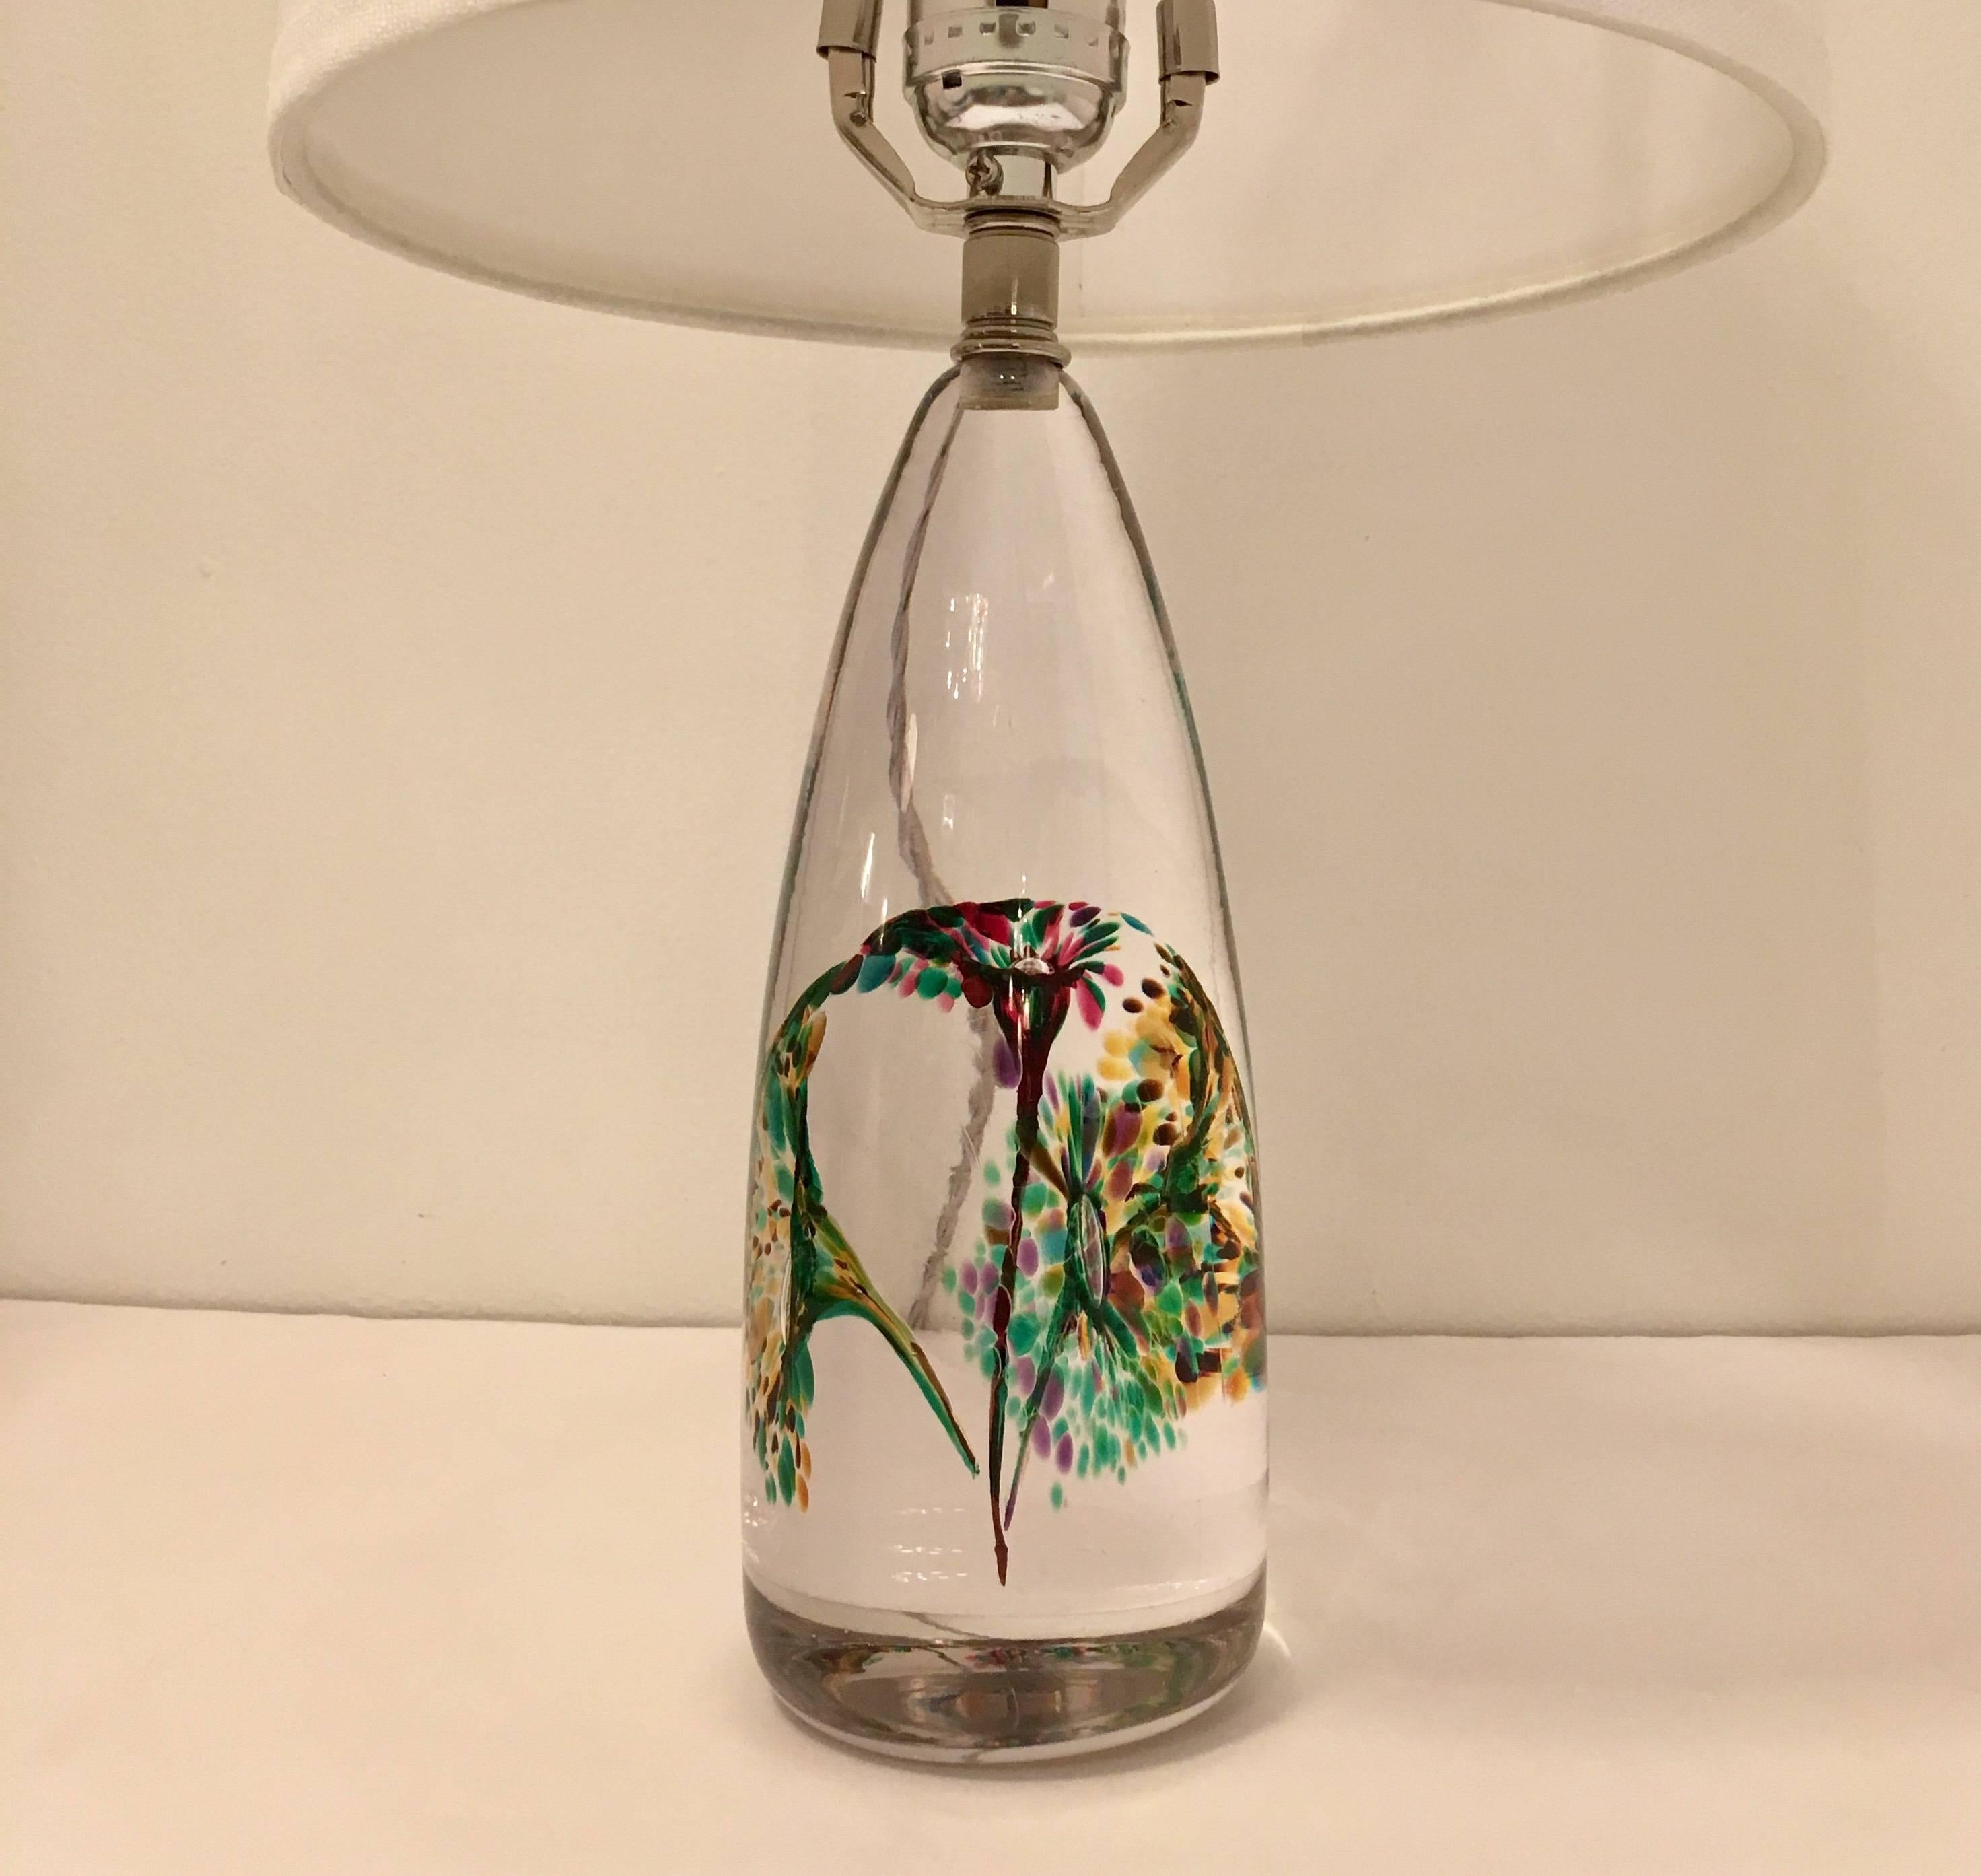 A beautiful pair of clear crystal glass with colored floral inclusions. Newly rewired. The Swedish glass crystal lamps are made by FM Konstglas, Ronneby.